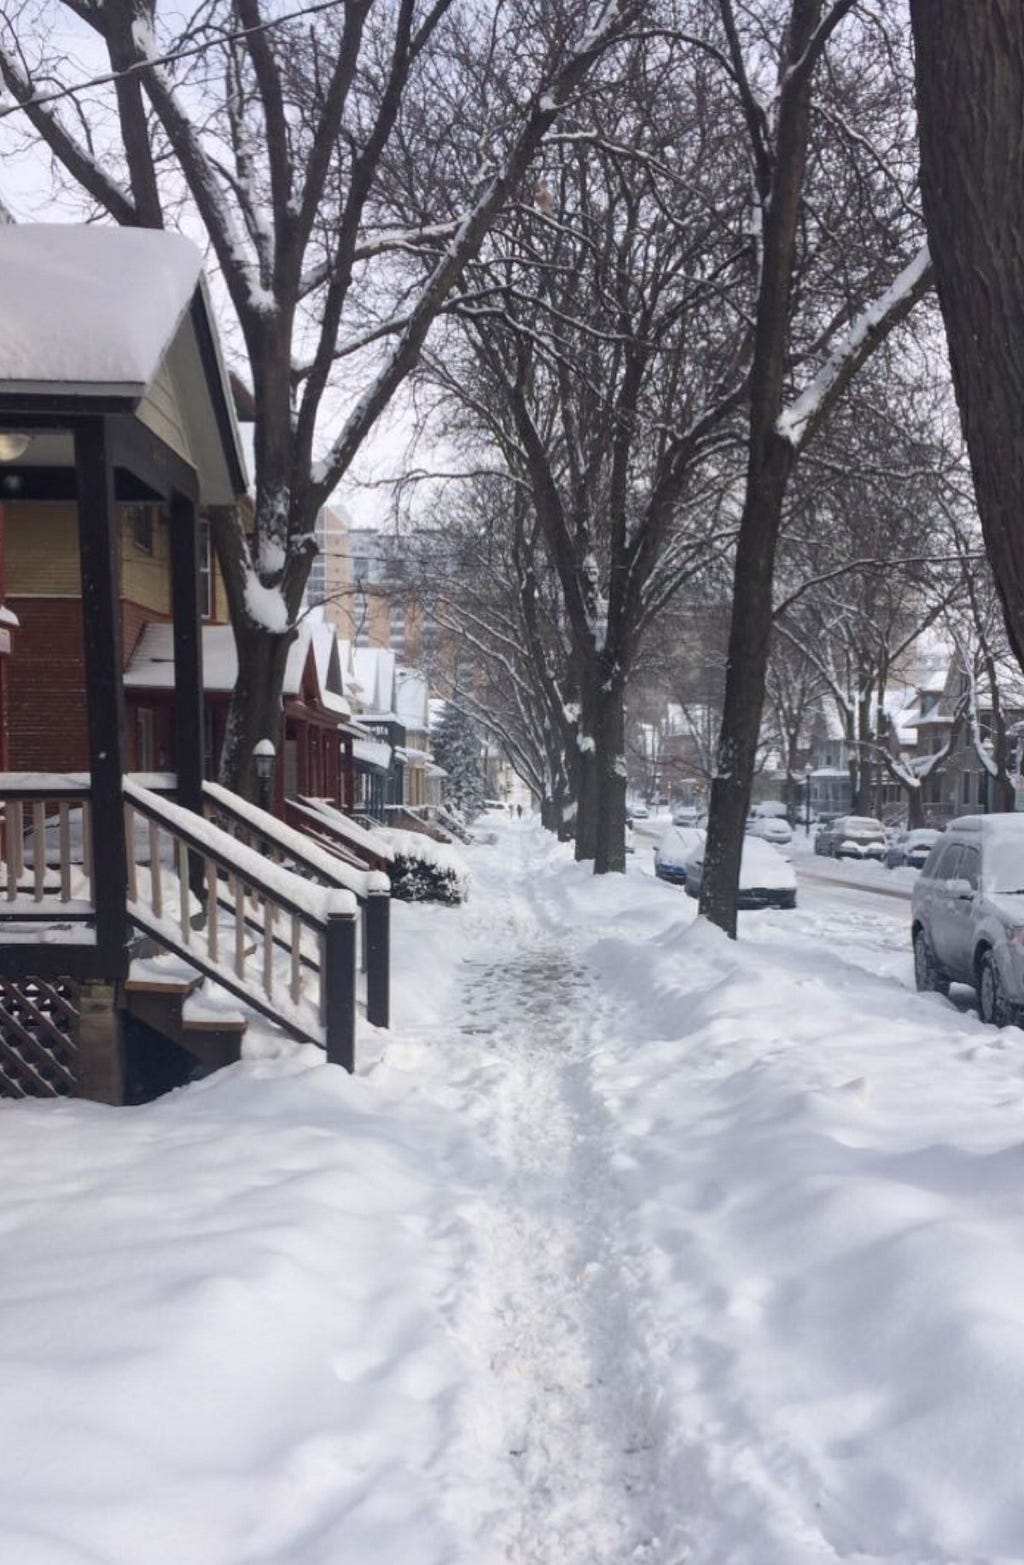 Houses lining a snow-covered sidewalk